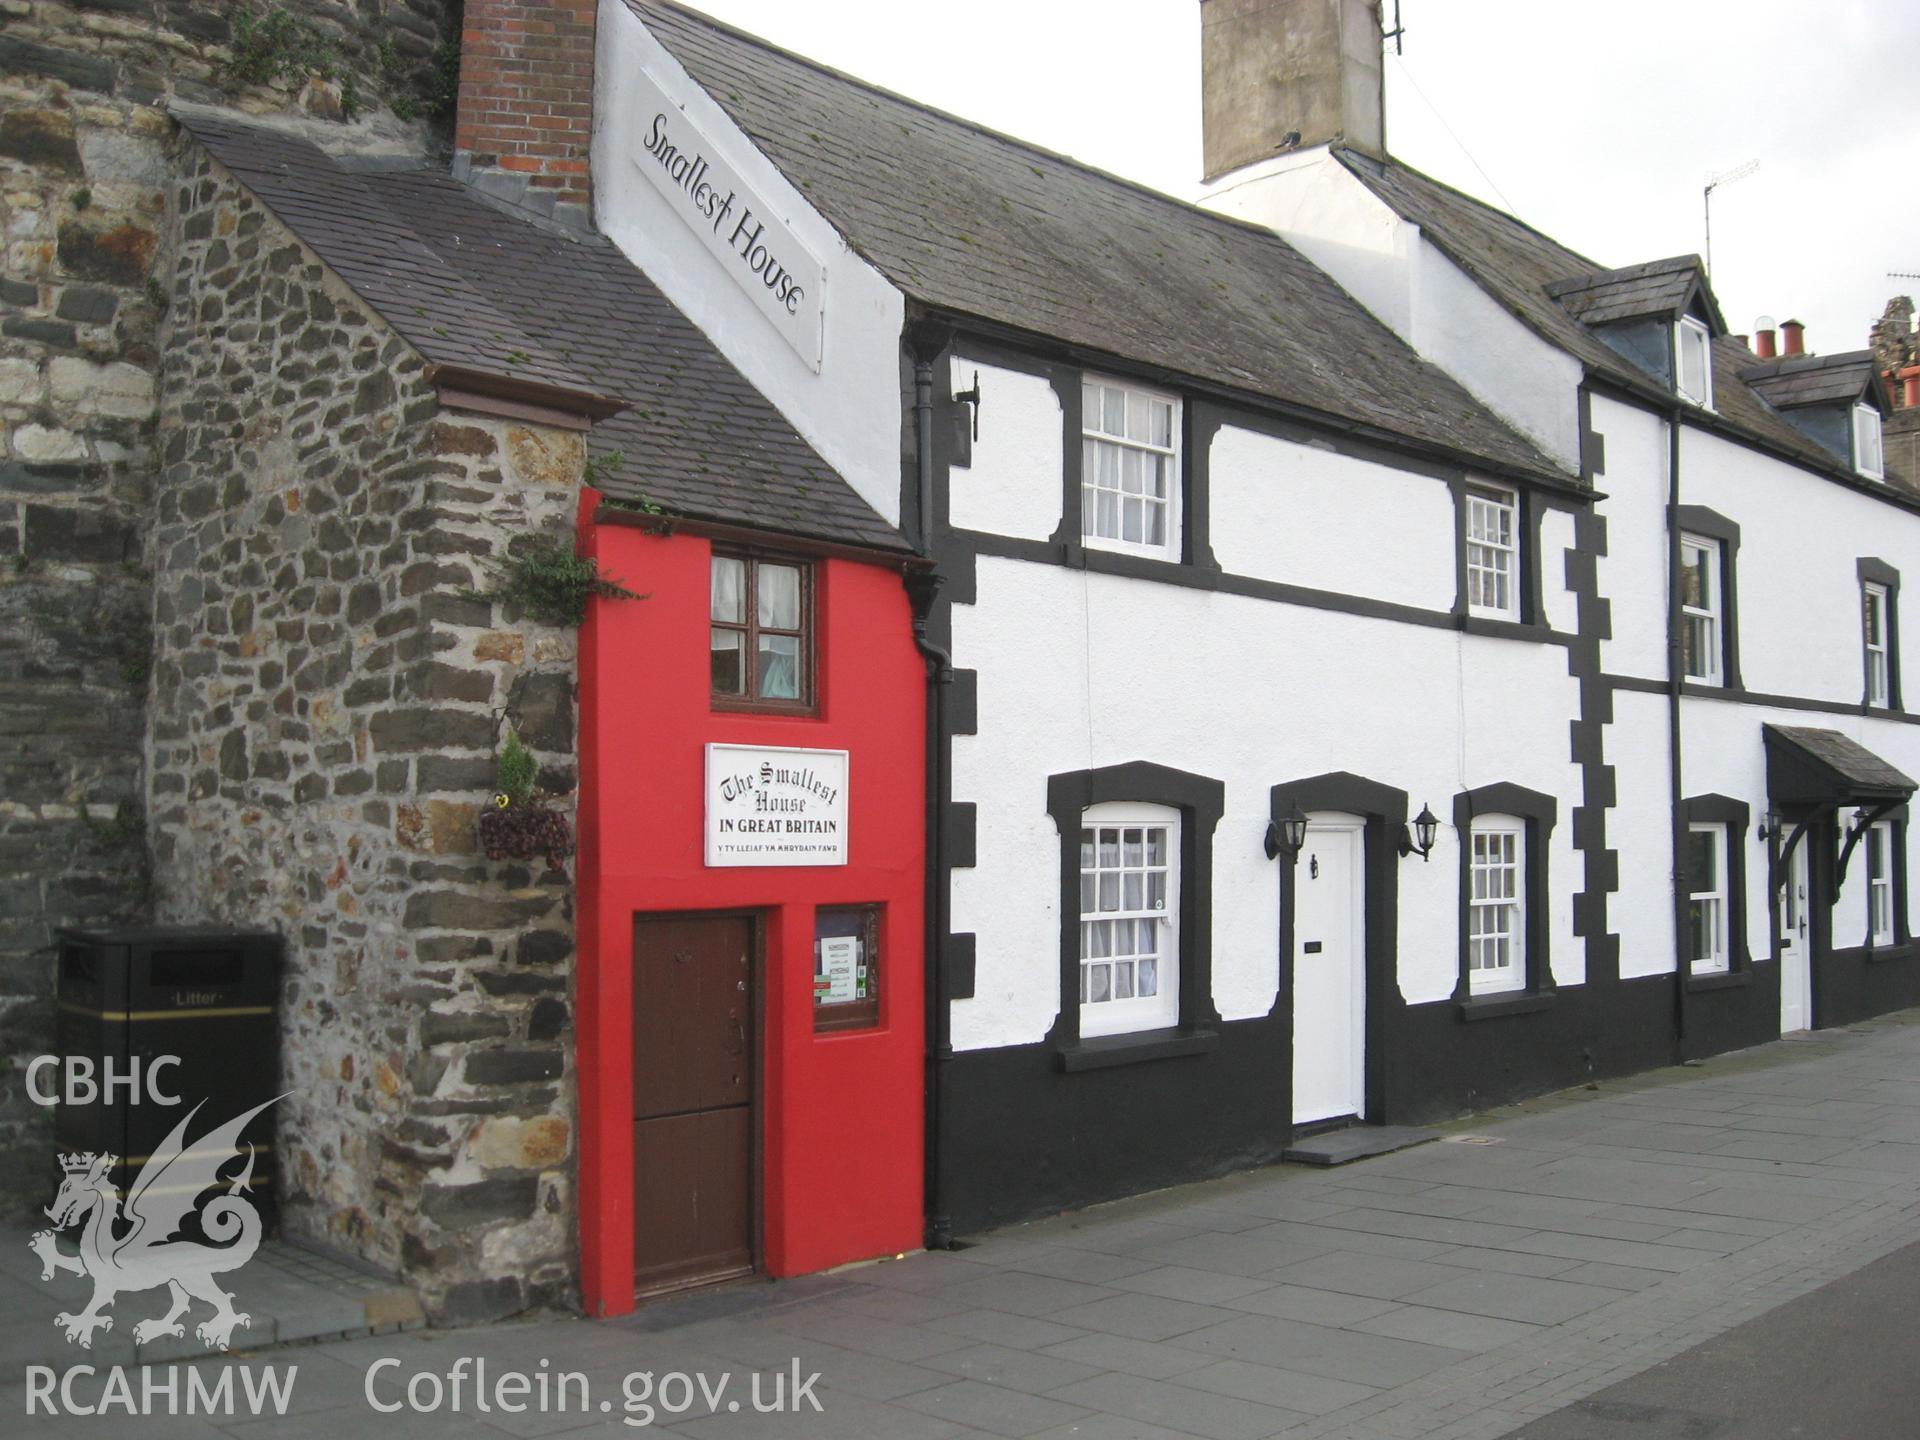 Colour photo of Quay House, taken by Paul R. Davis and dated 3rd August 2010.